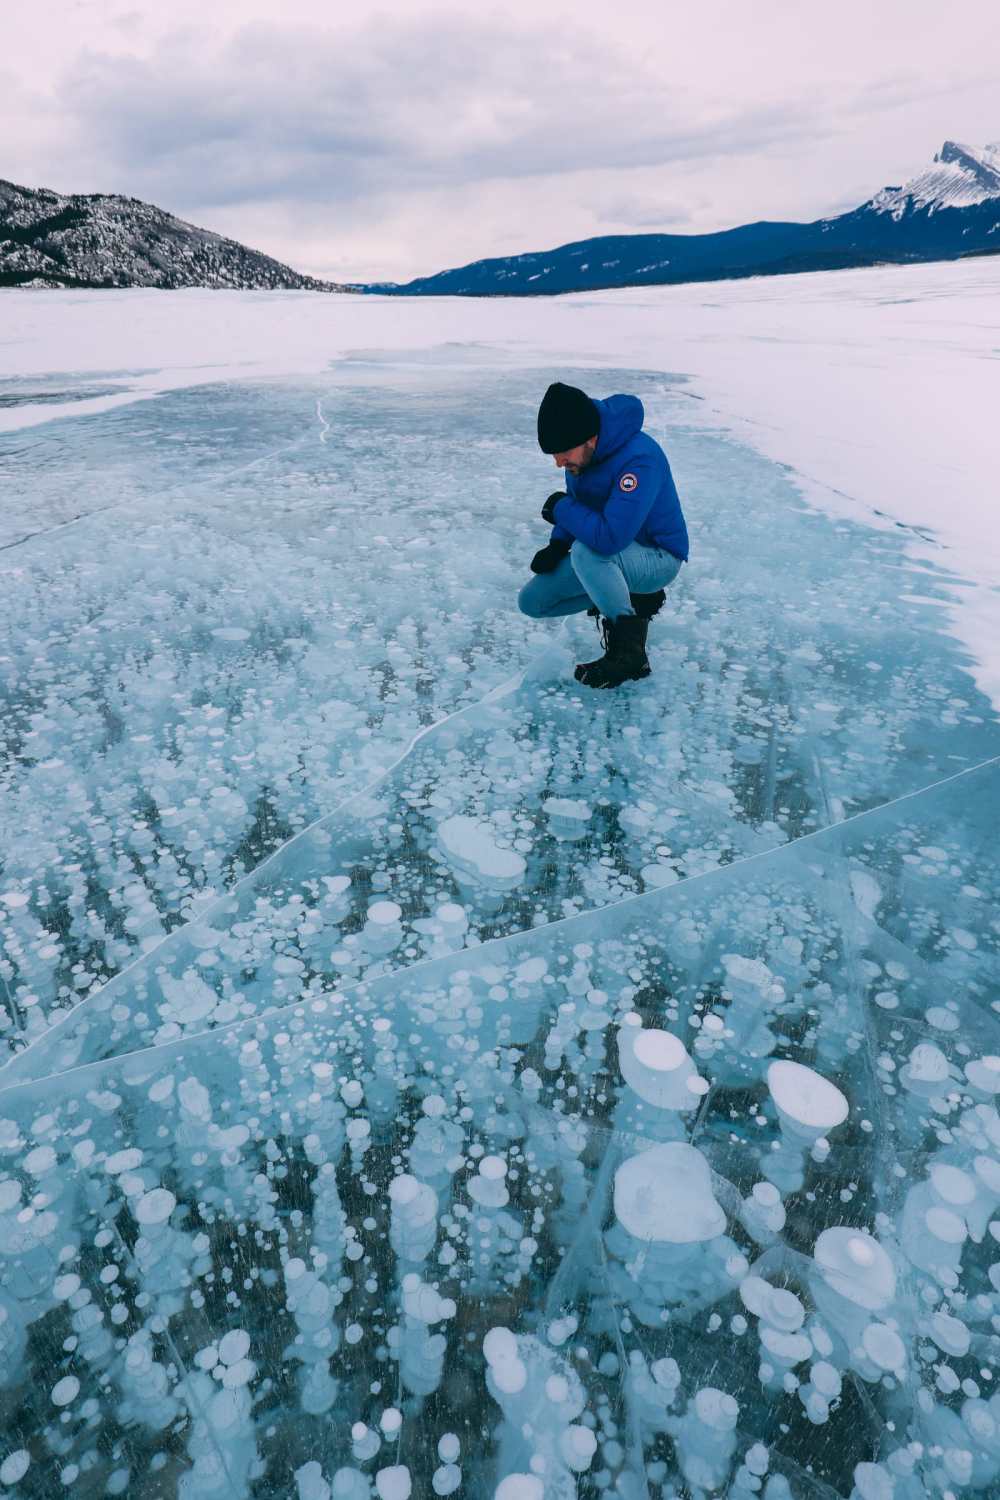 Driving Canada's Epic Icefields Parkway And Finding The Frozen Bubbles Of Abraham Lake (30)